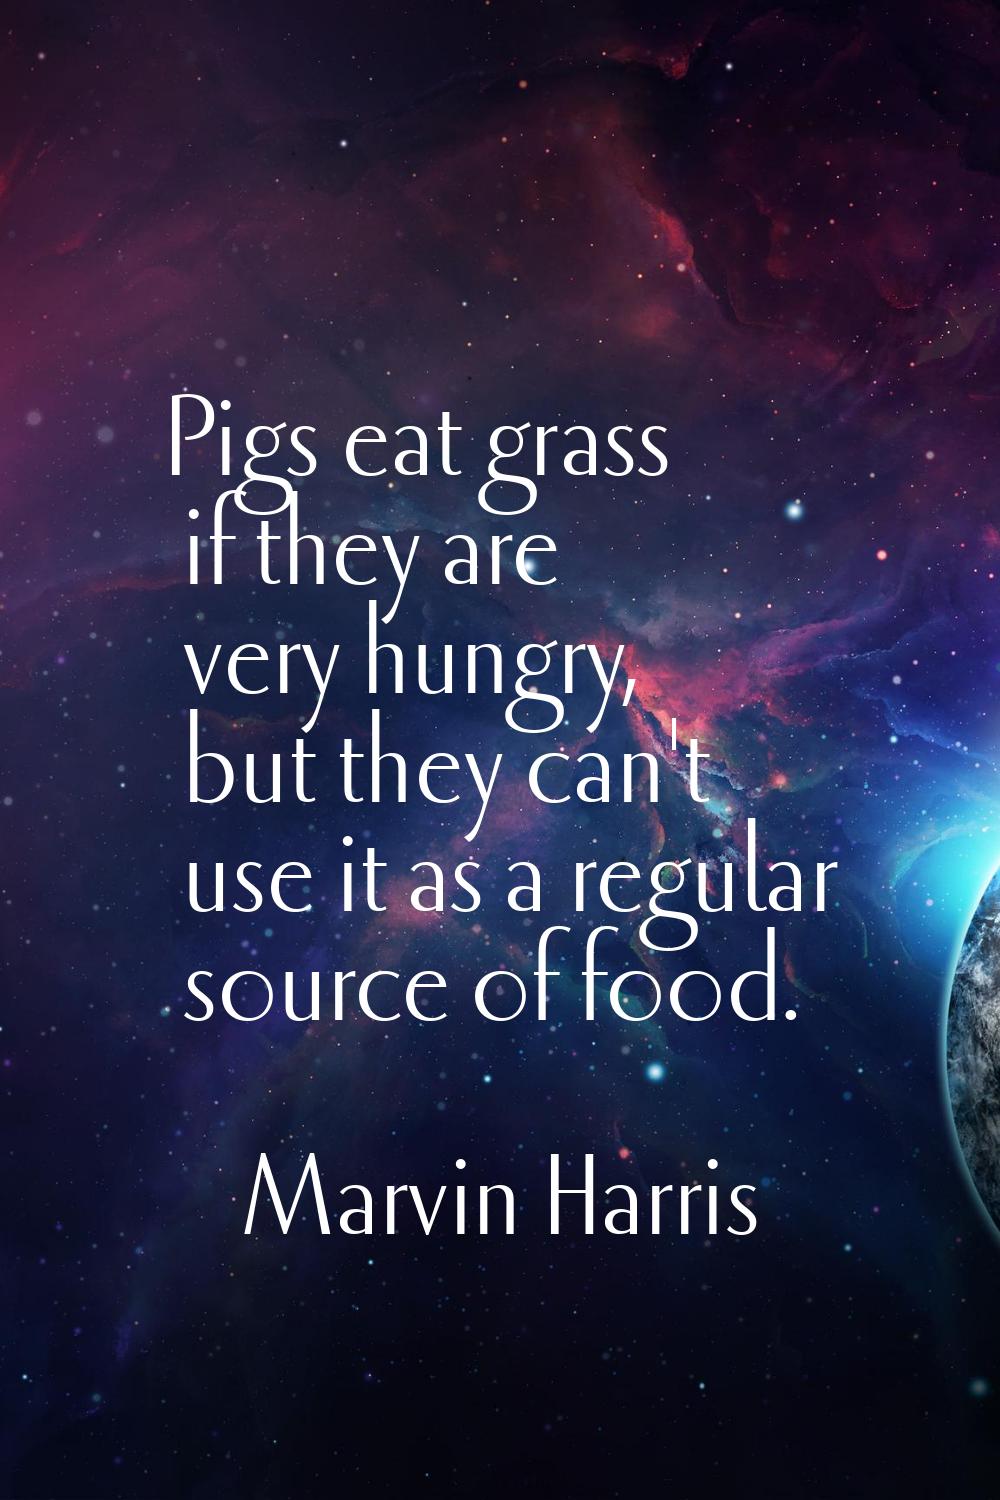 Pigs eat grass if they are very hungry, but they can't use it as a regular source of food.